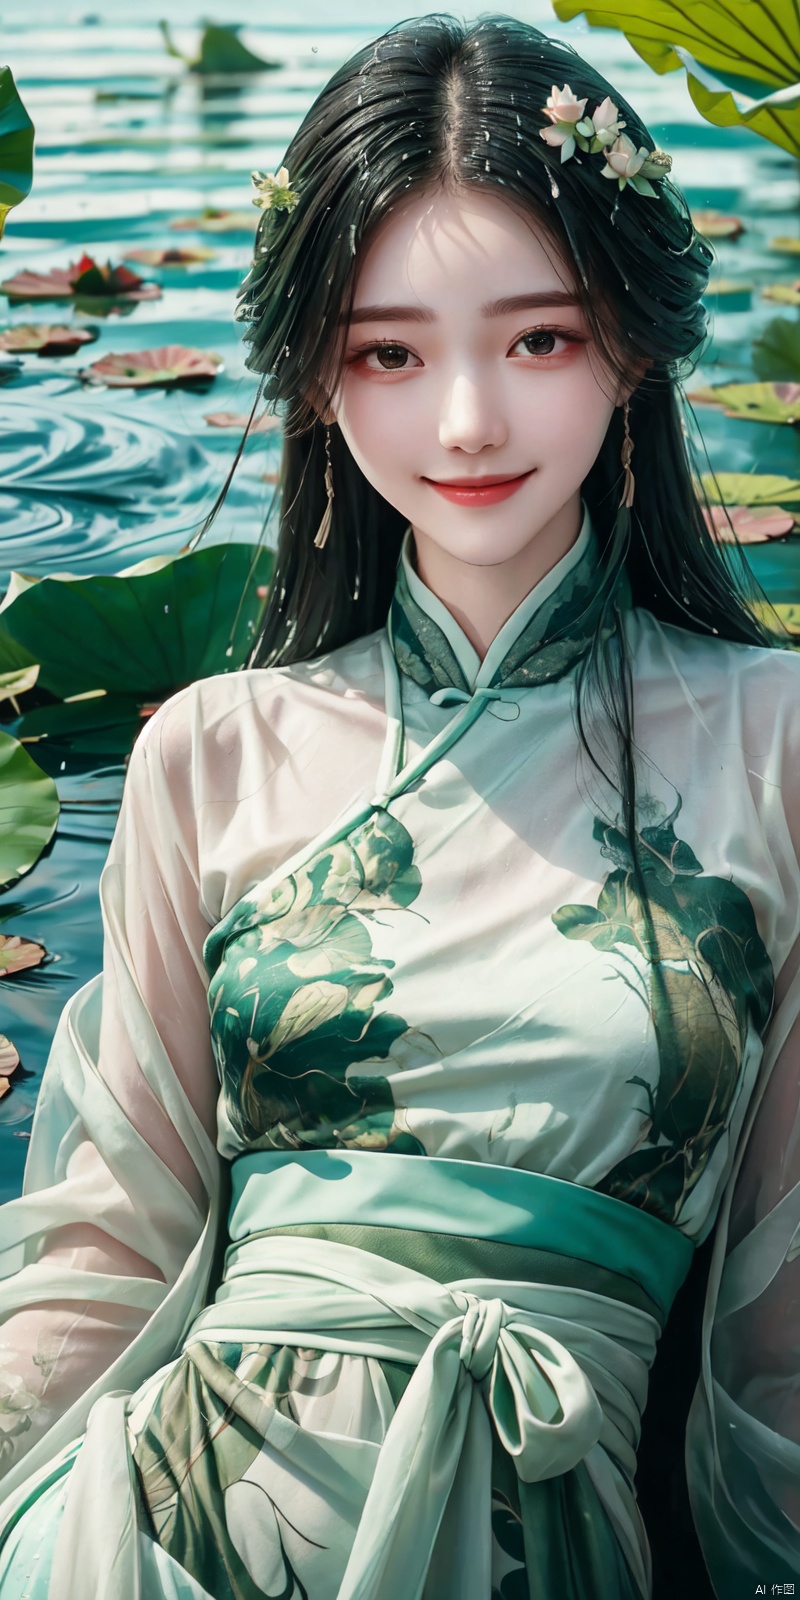  (Good structure), DSLR Quality,Depth of field,kind smile,looking_at_viewer,Dynamic pose,,
A girl, lying in the water, in a green pool, covered with lotus leaves, dressed in gauze-like Hanfu,hedress,Smile, wet clothes,Wet hair, liushen, chinese dress